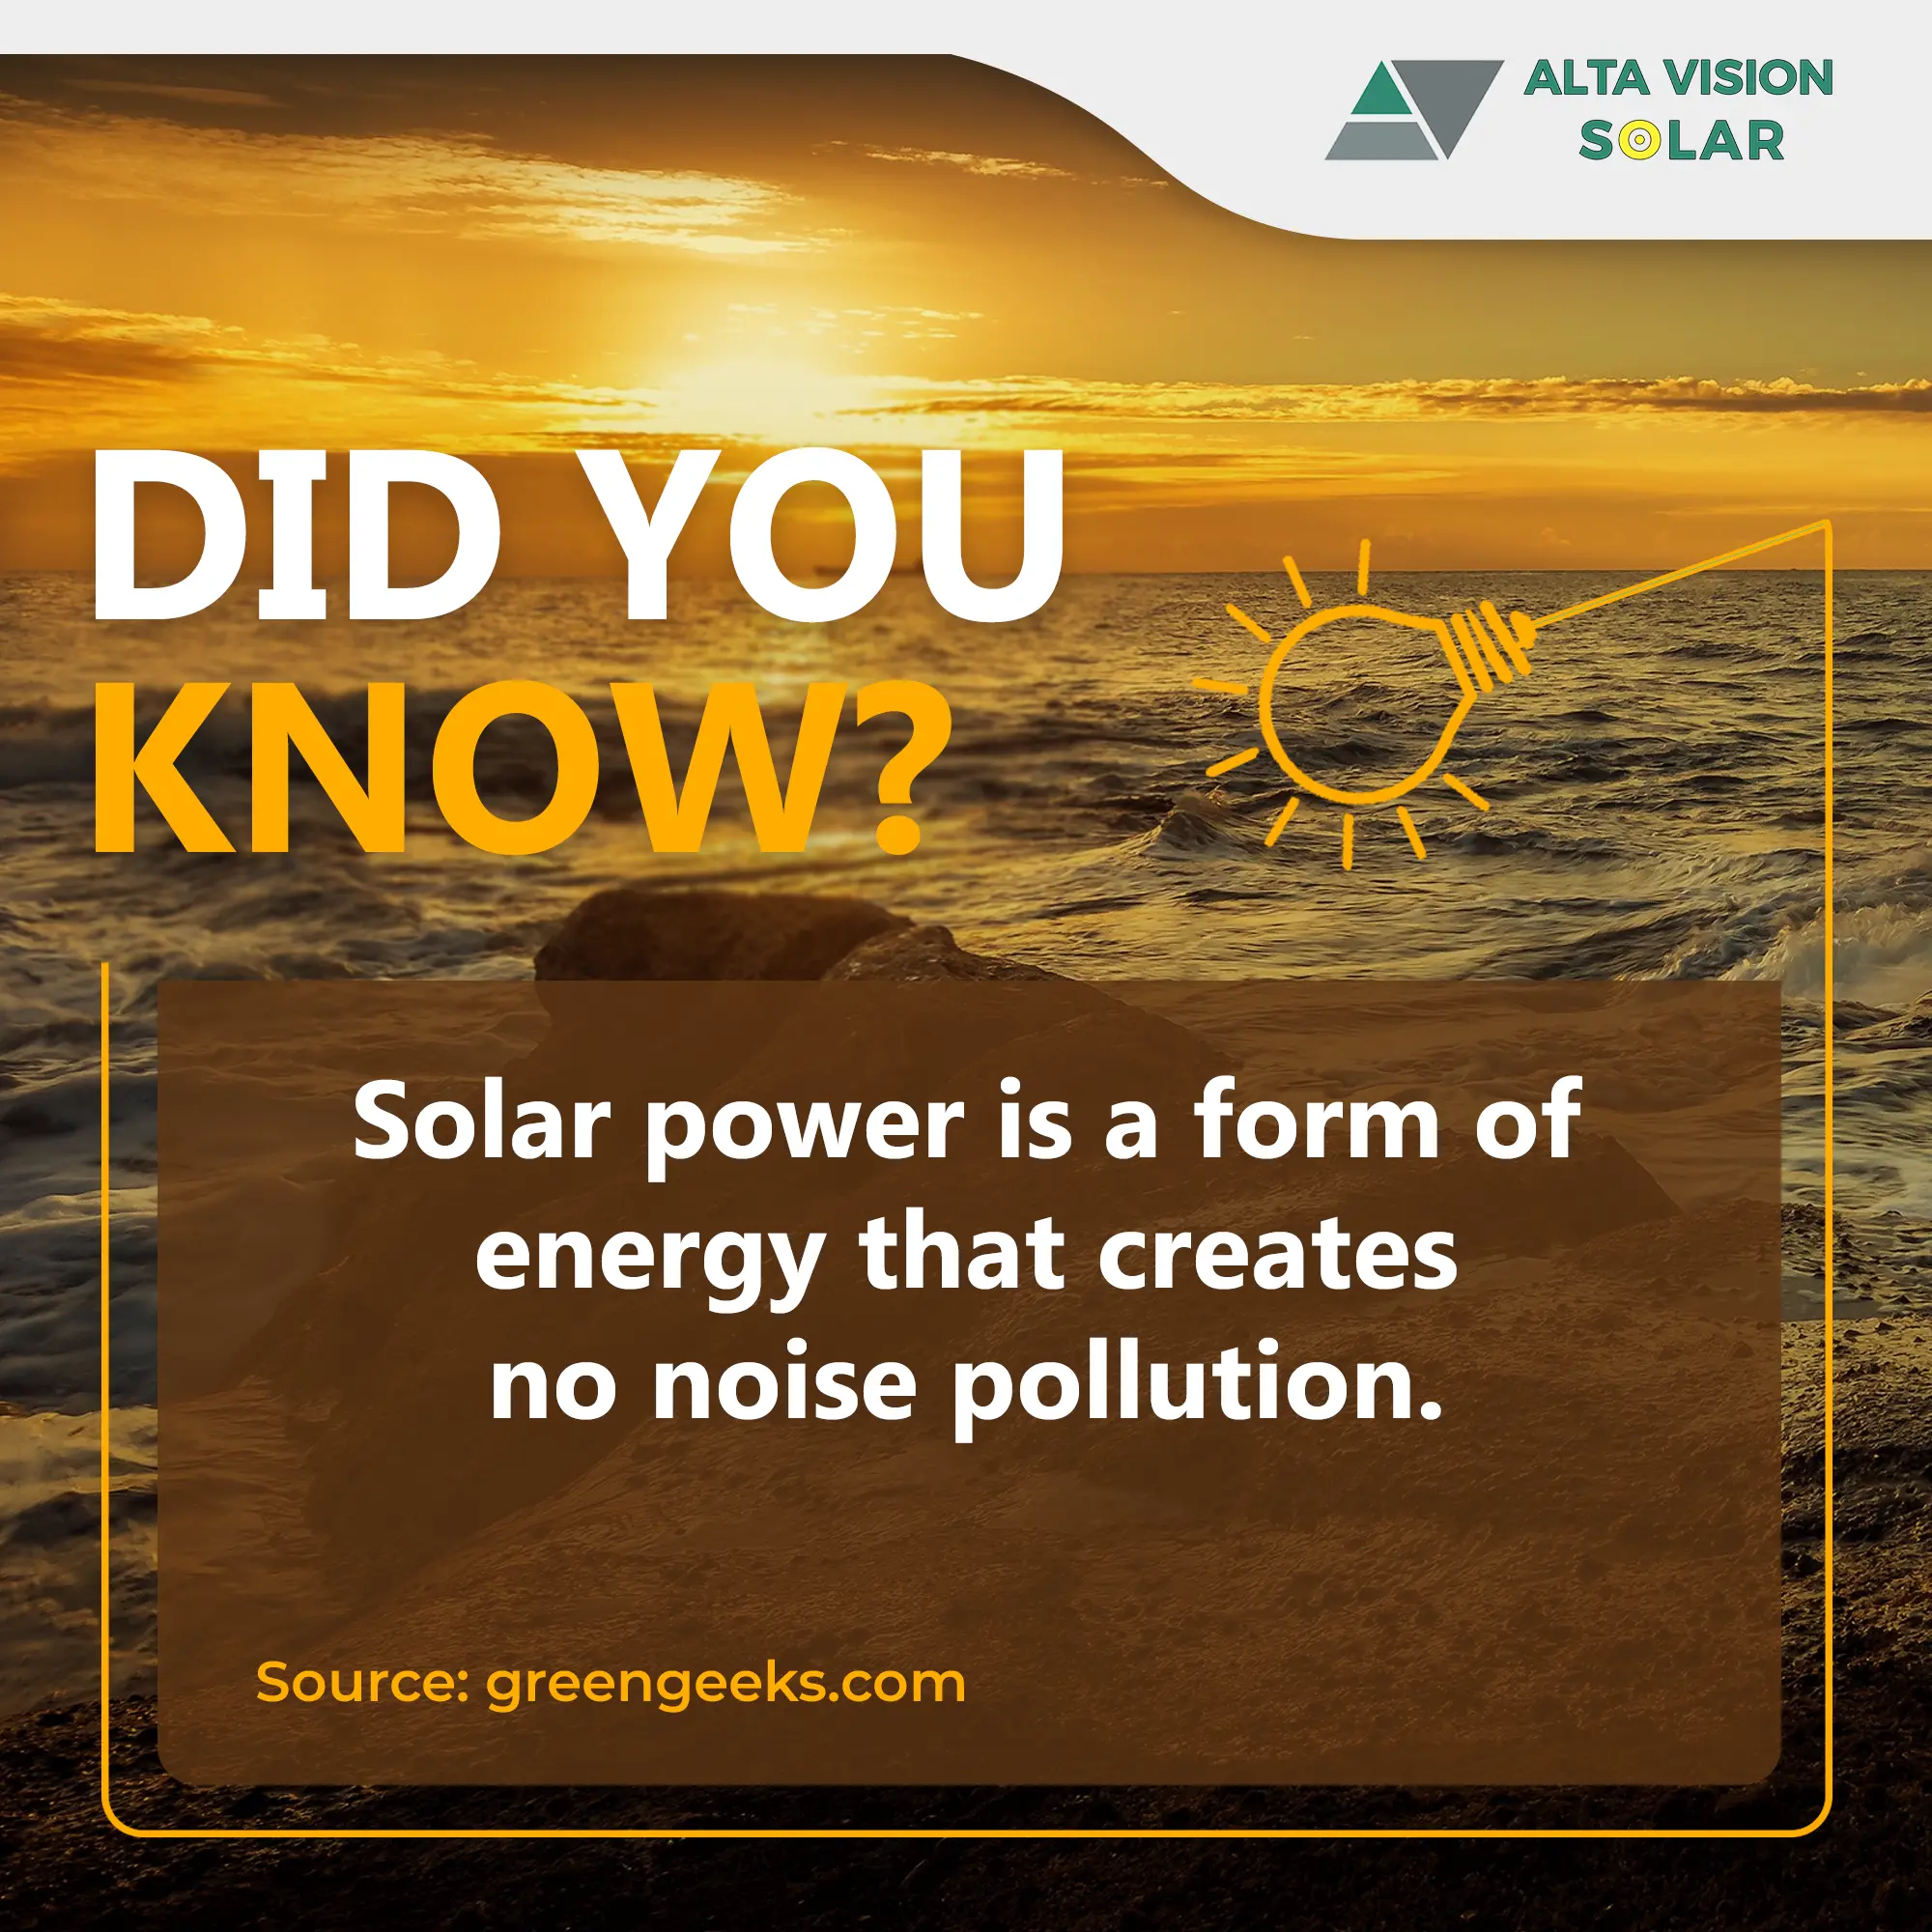 Solar power is a form of energy that creates no noise pollution